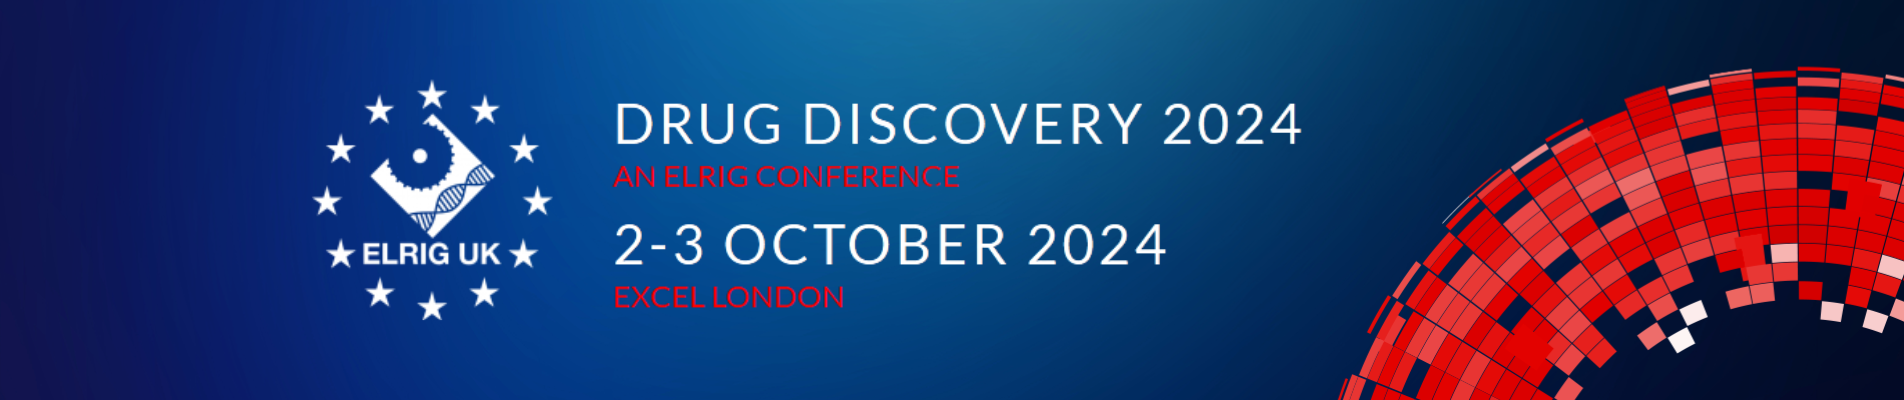 Drug Discovery 2024